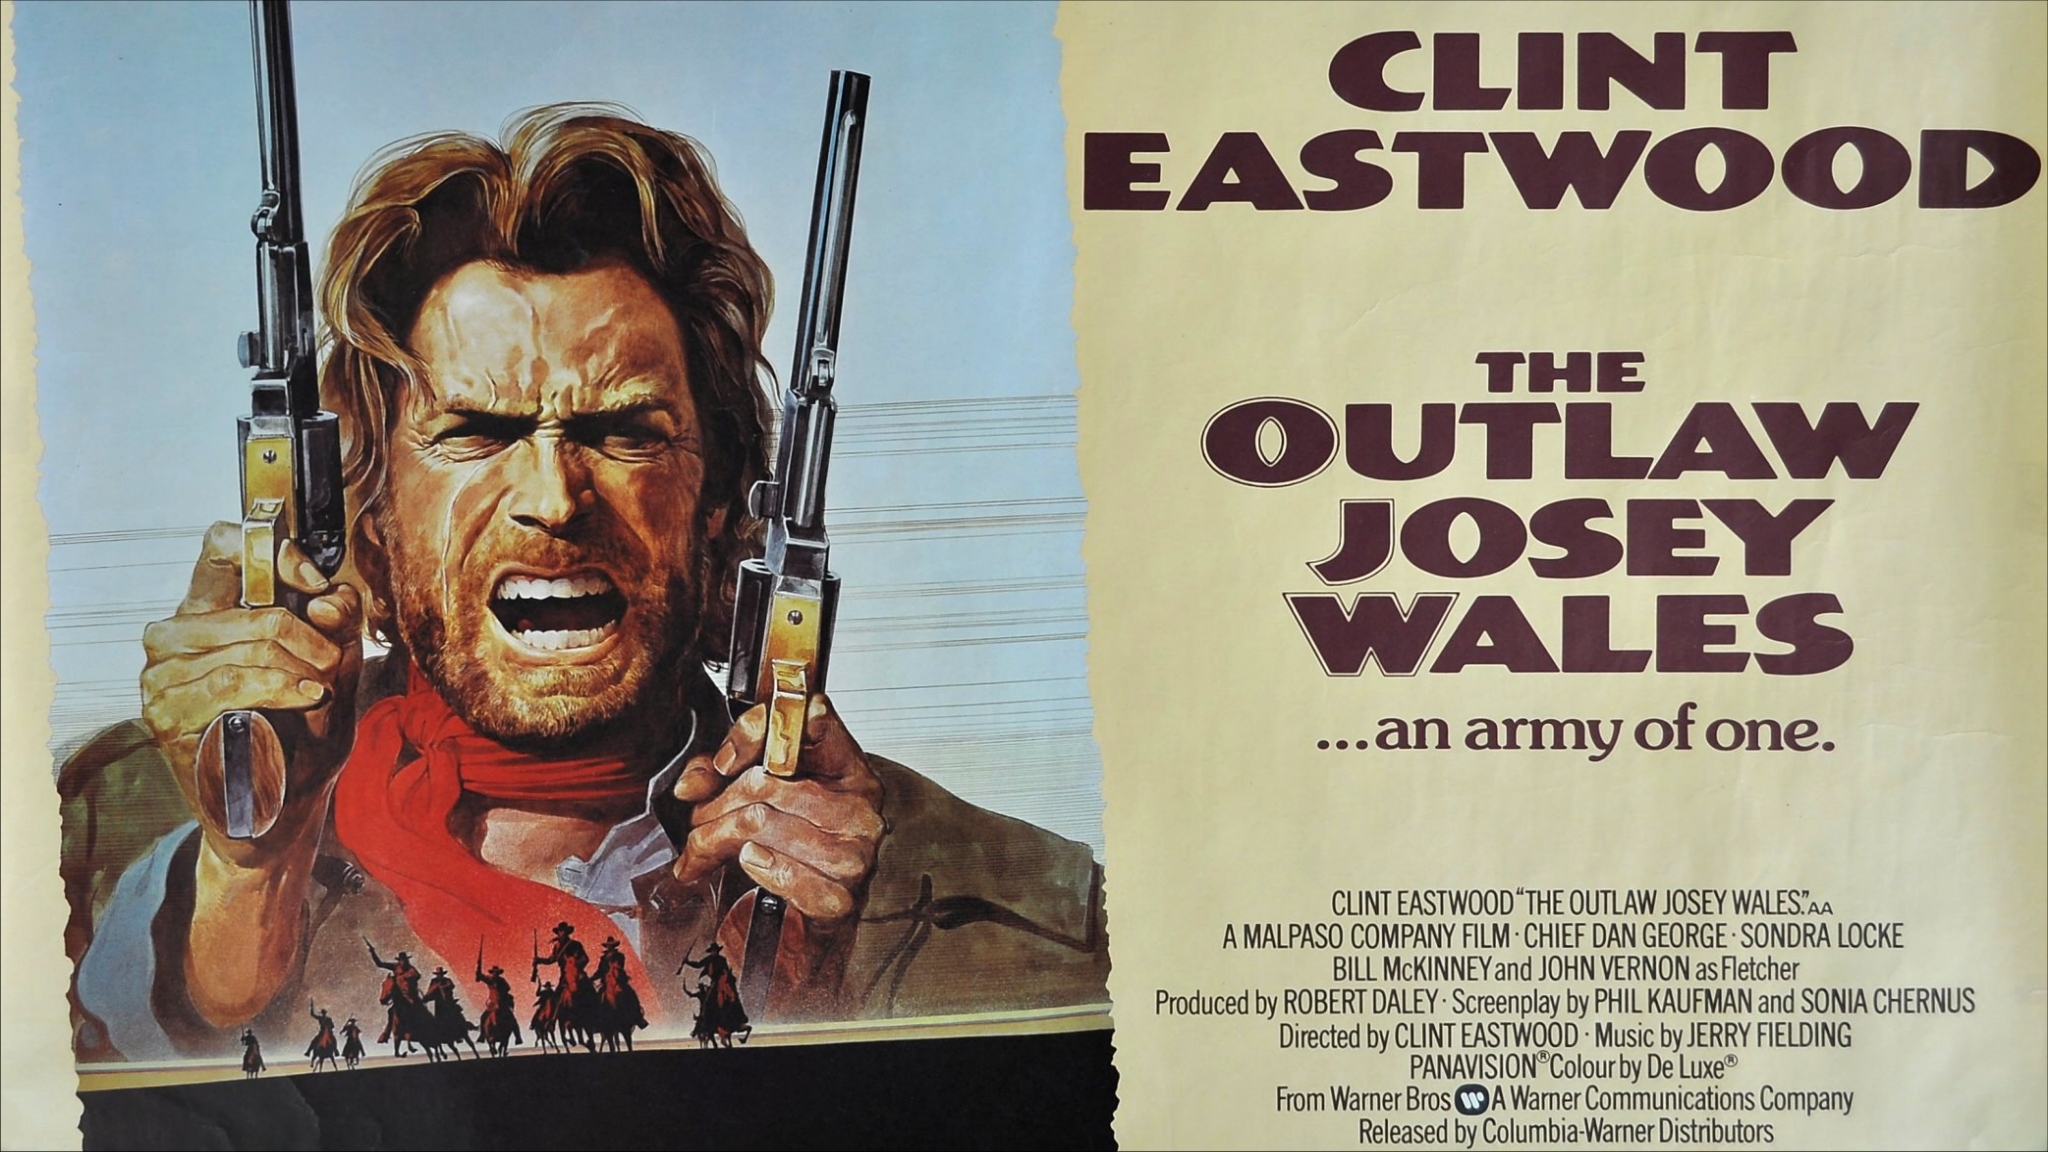 clint eastwood, the outlaw josey wales, movie